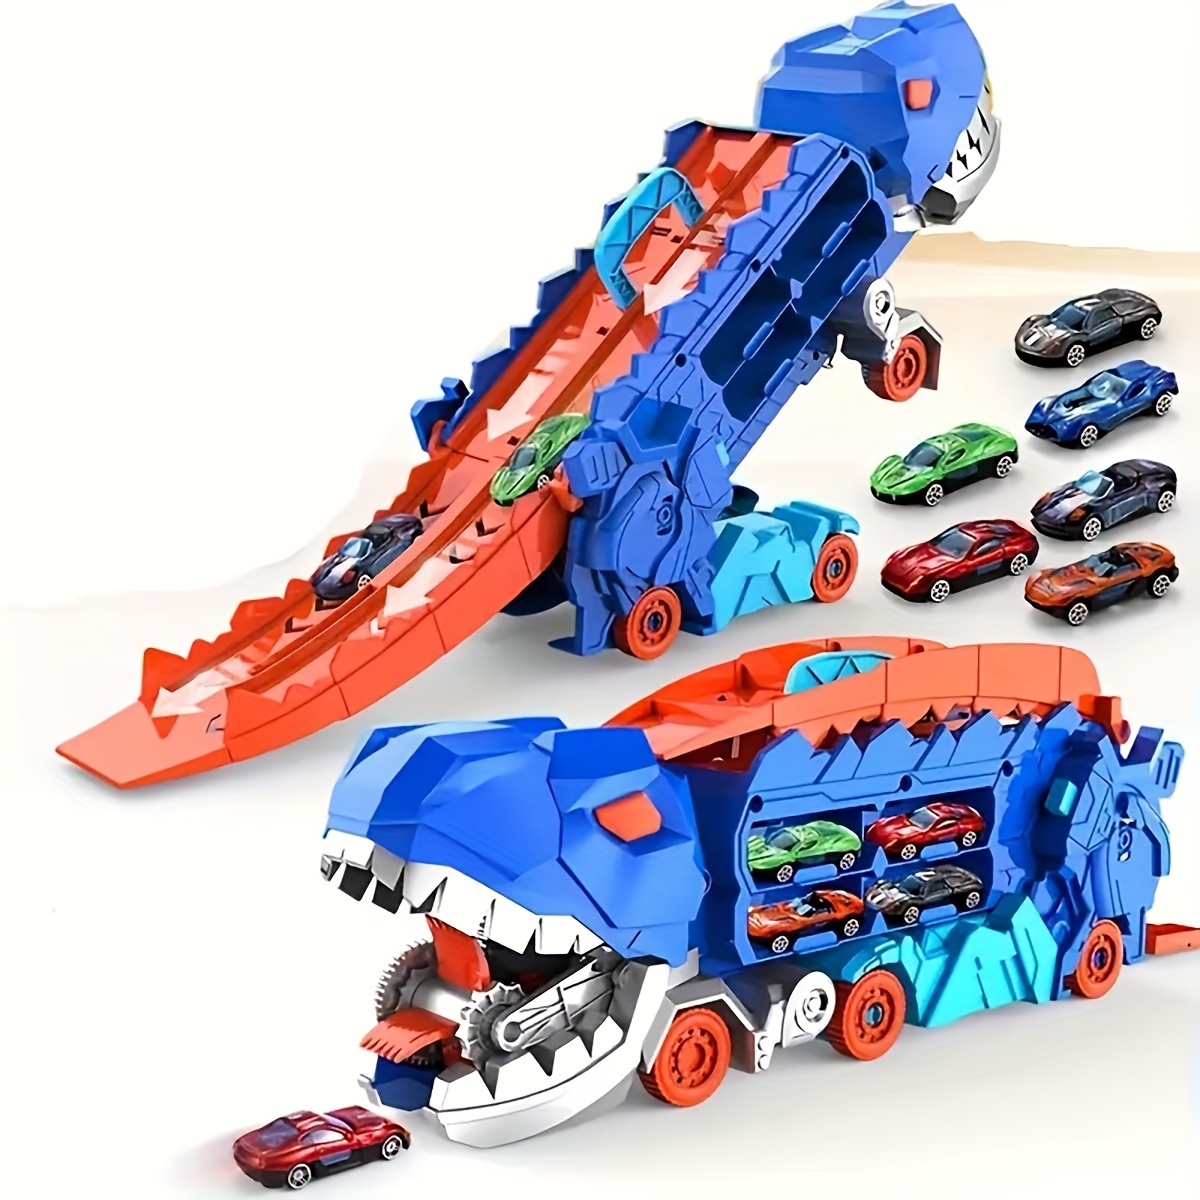 

Dinosaur Ultimate Track Toy, Transport Dinosaur Truck With Foldable Sliding 25-inch Race Track, Transforms Into Standing T-rex, Best Birthday Gifts Toys, Random Color Halloween Gift